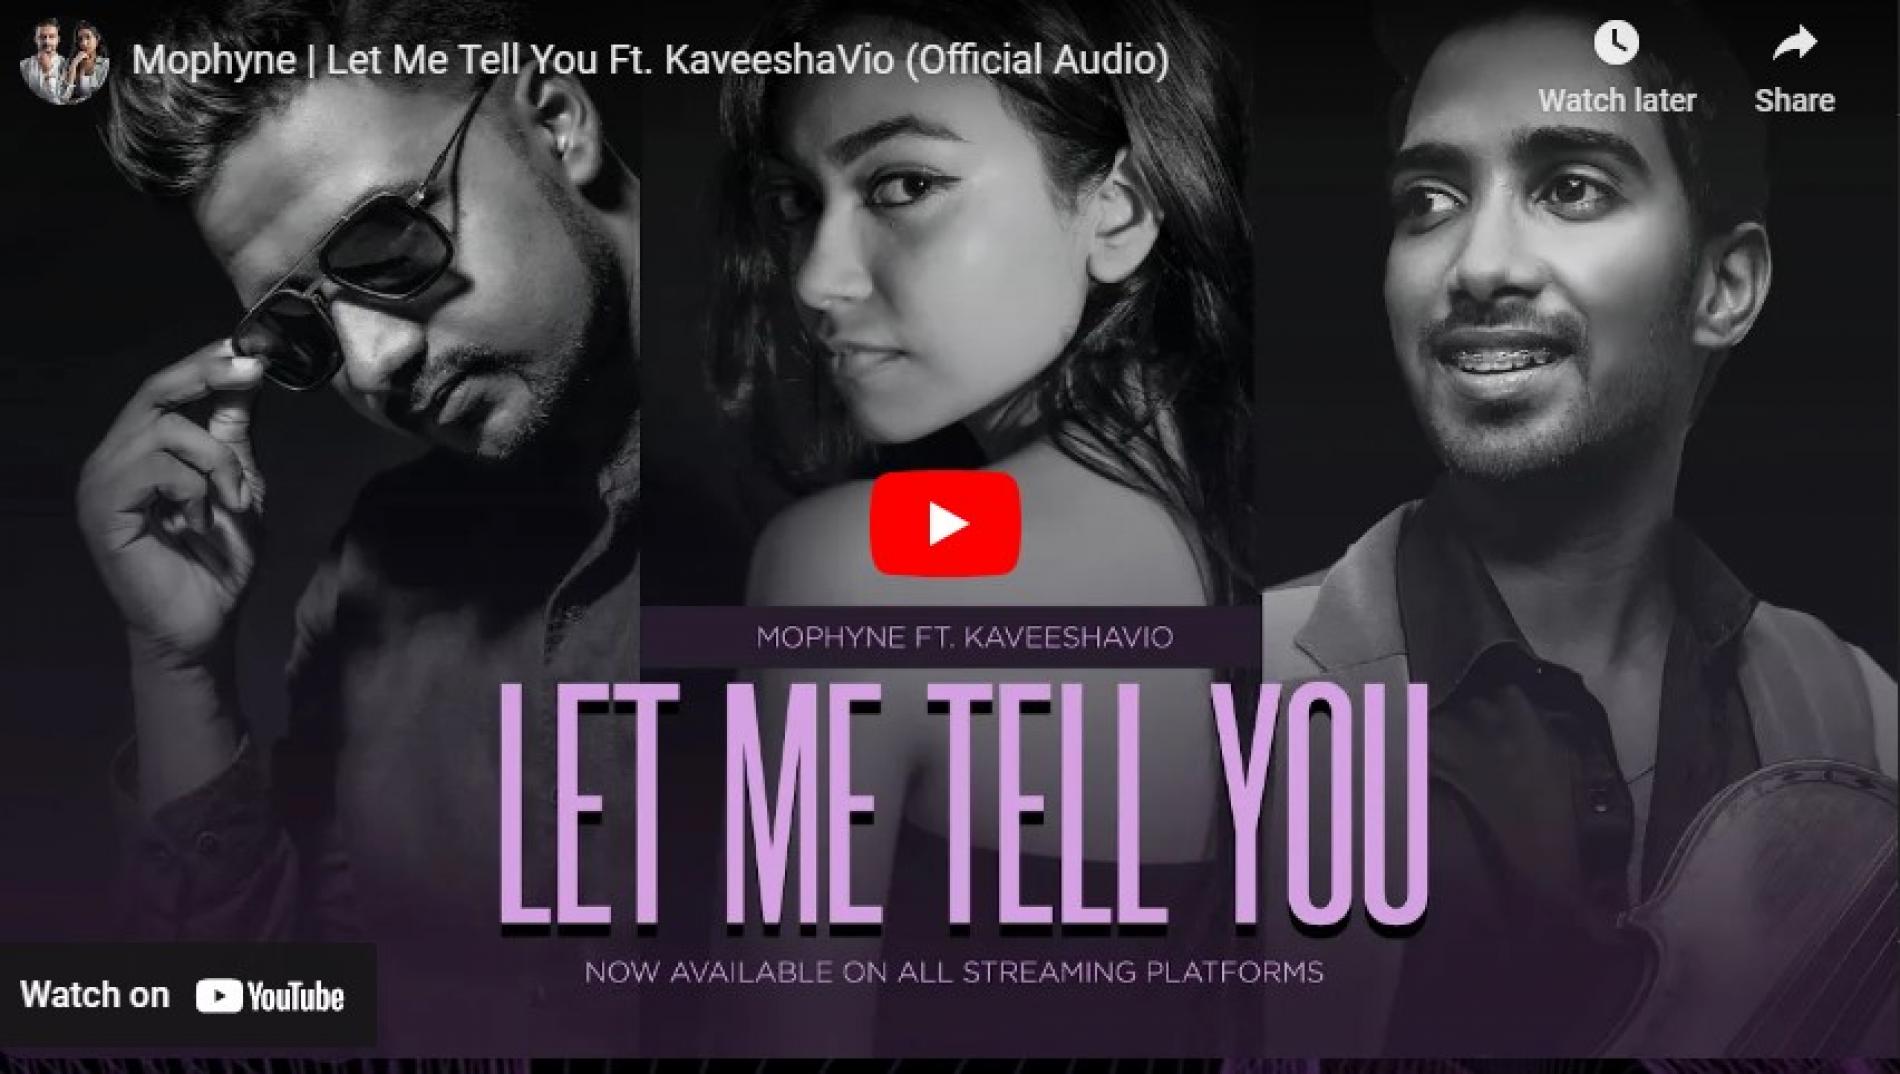 New Music : Mophyne | Let Me Tell You Ft. KaveeshaVio (Official Audio)